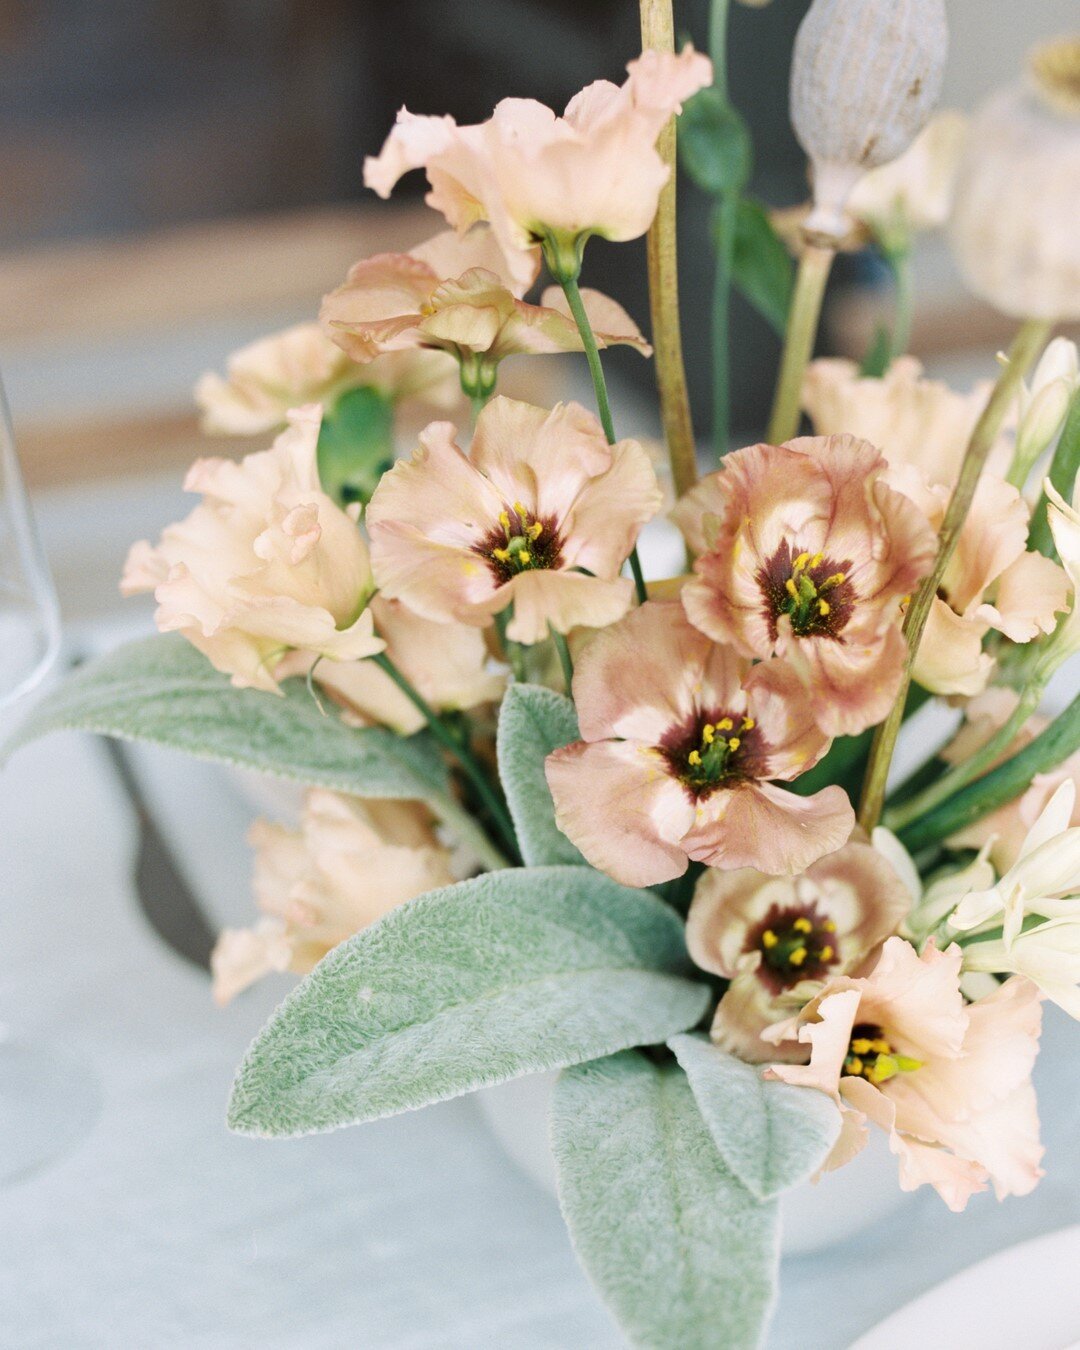 I recently had the honor of sharing some of my favorite seasonal blooms (alongside the talented SoCal based floral designer, Lily Roden of @lilyrodenfloralstudio!) for a brides.com article wonderfully curated and written by @daniellehalibey.⠀⠀⠀⠀⠀⠀⠀⠀⠀